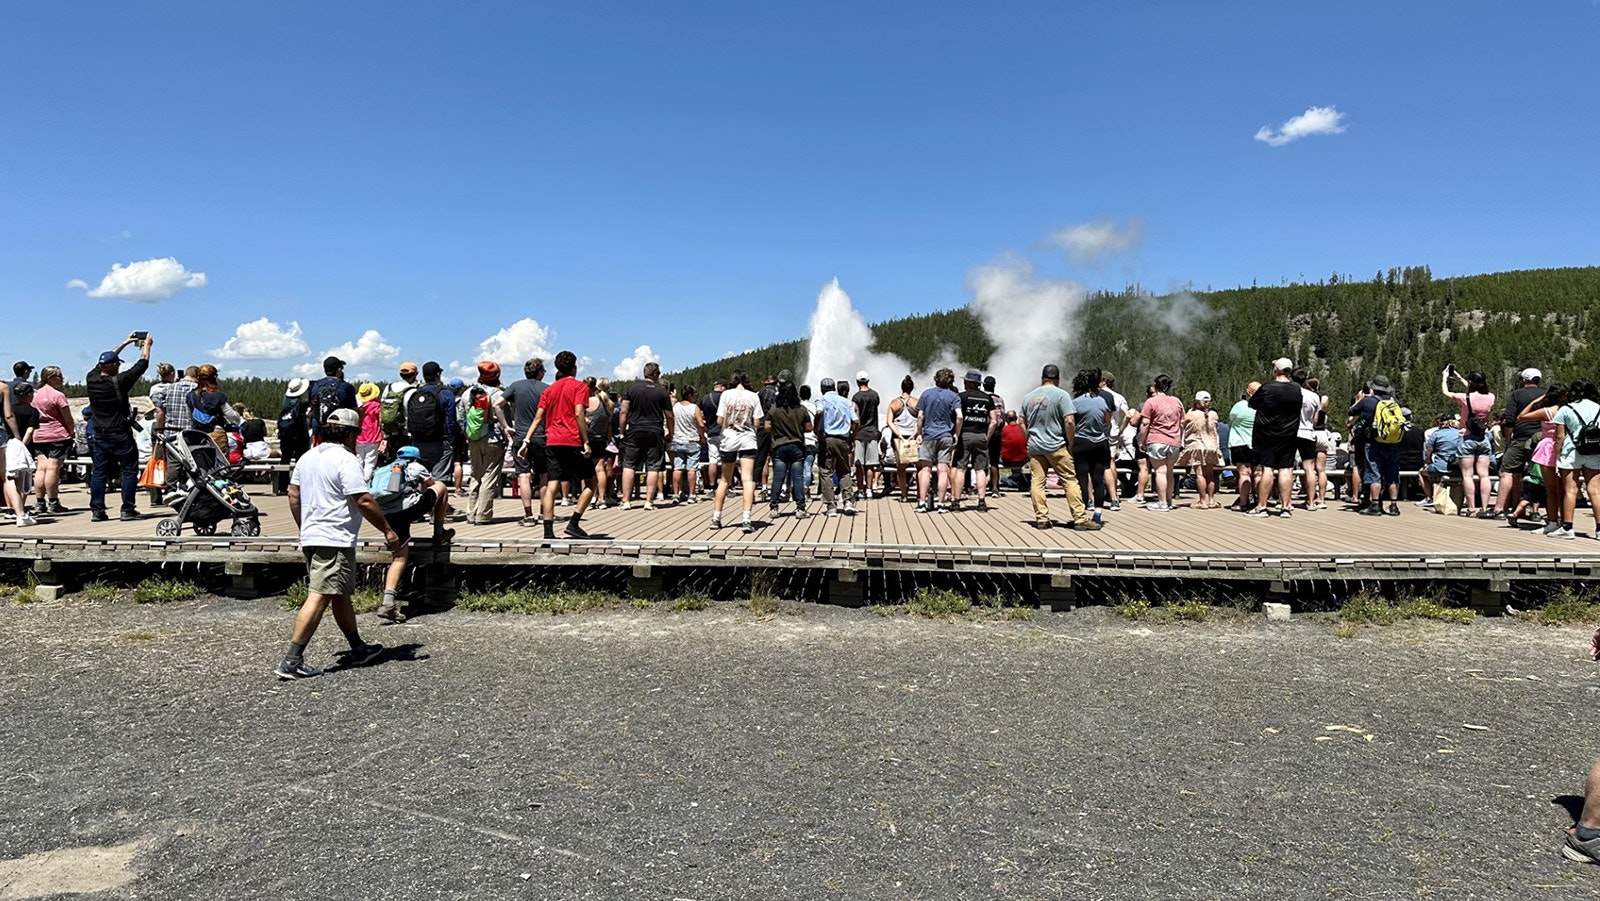 Old Faithful continues to be the most popular attraction at Yellowstone National Park.